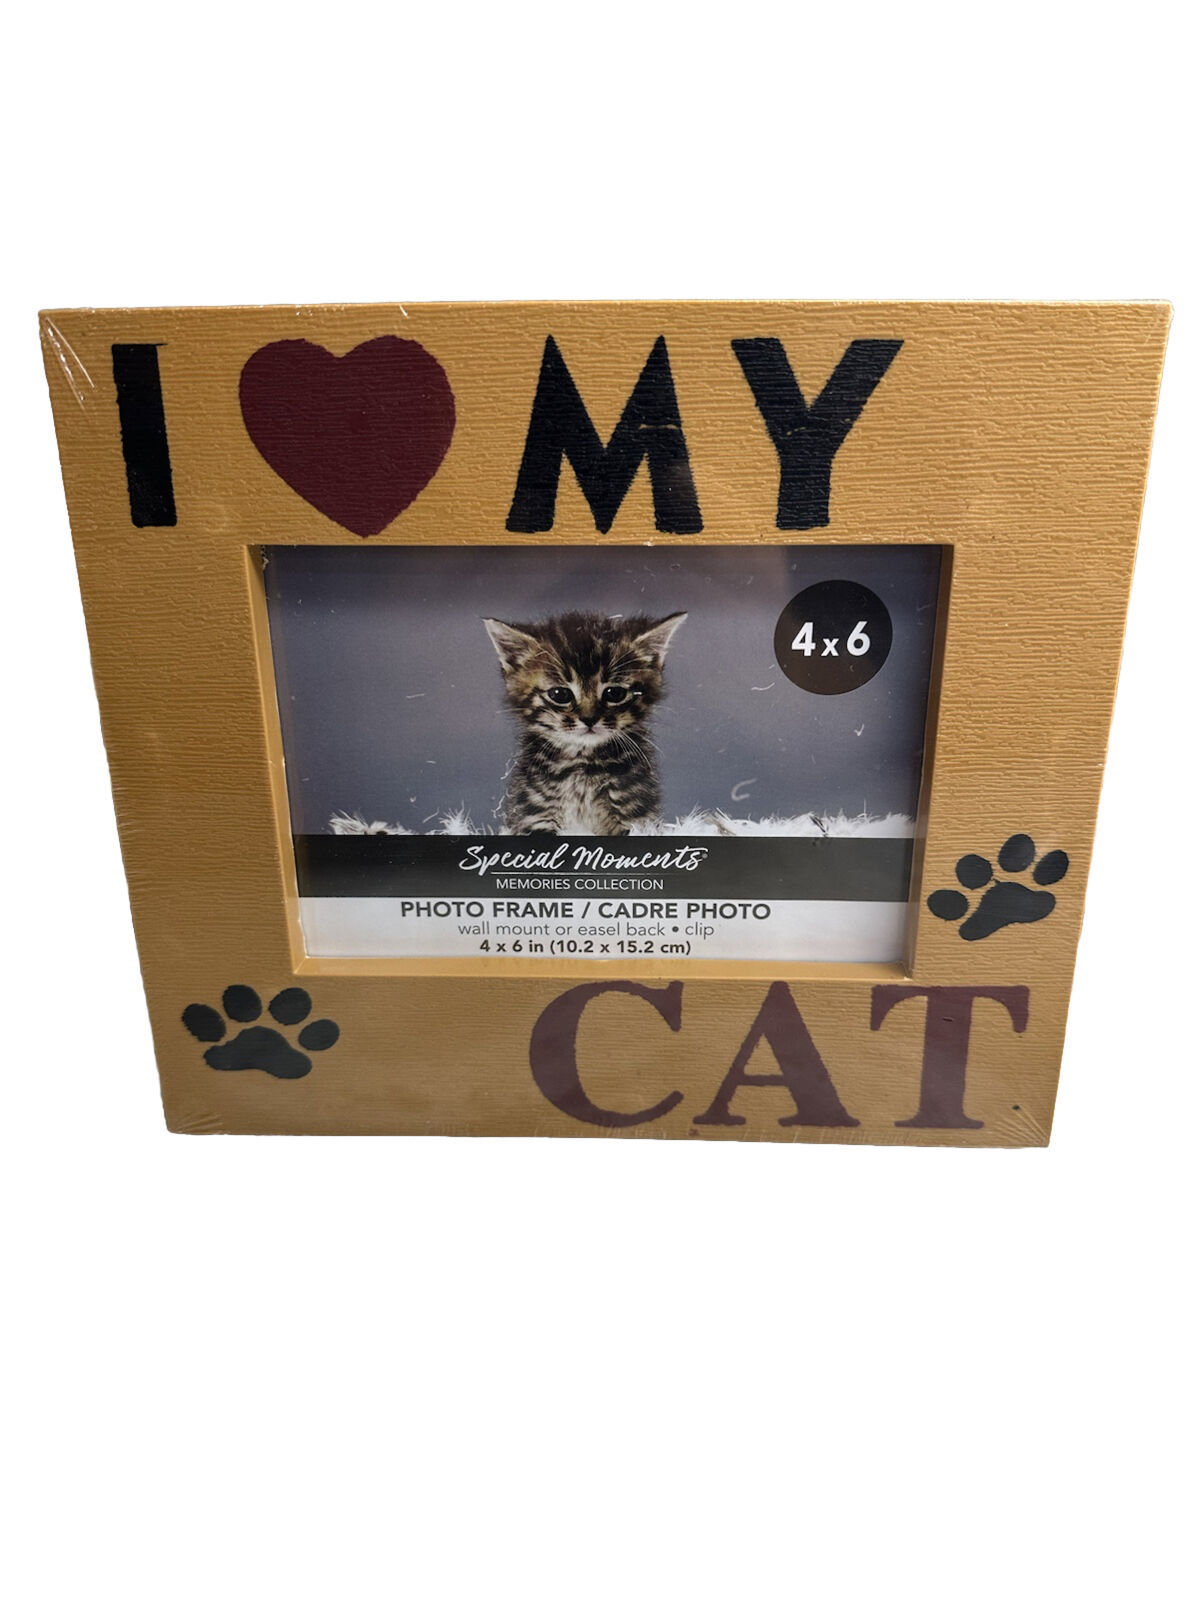 New Hobby Lobby Green Tree Gallery "I Love My Cat" Wooden Picture Frame  6"x4" - $19.68